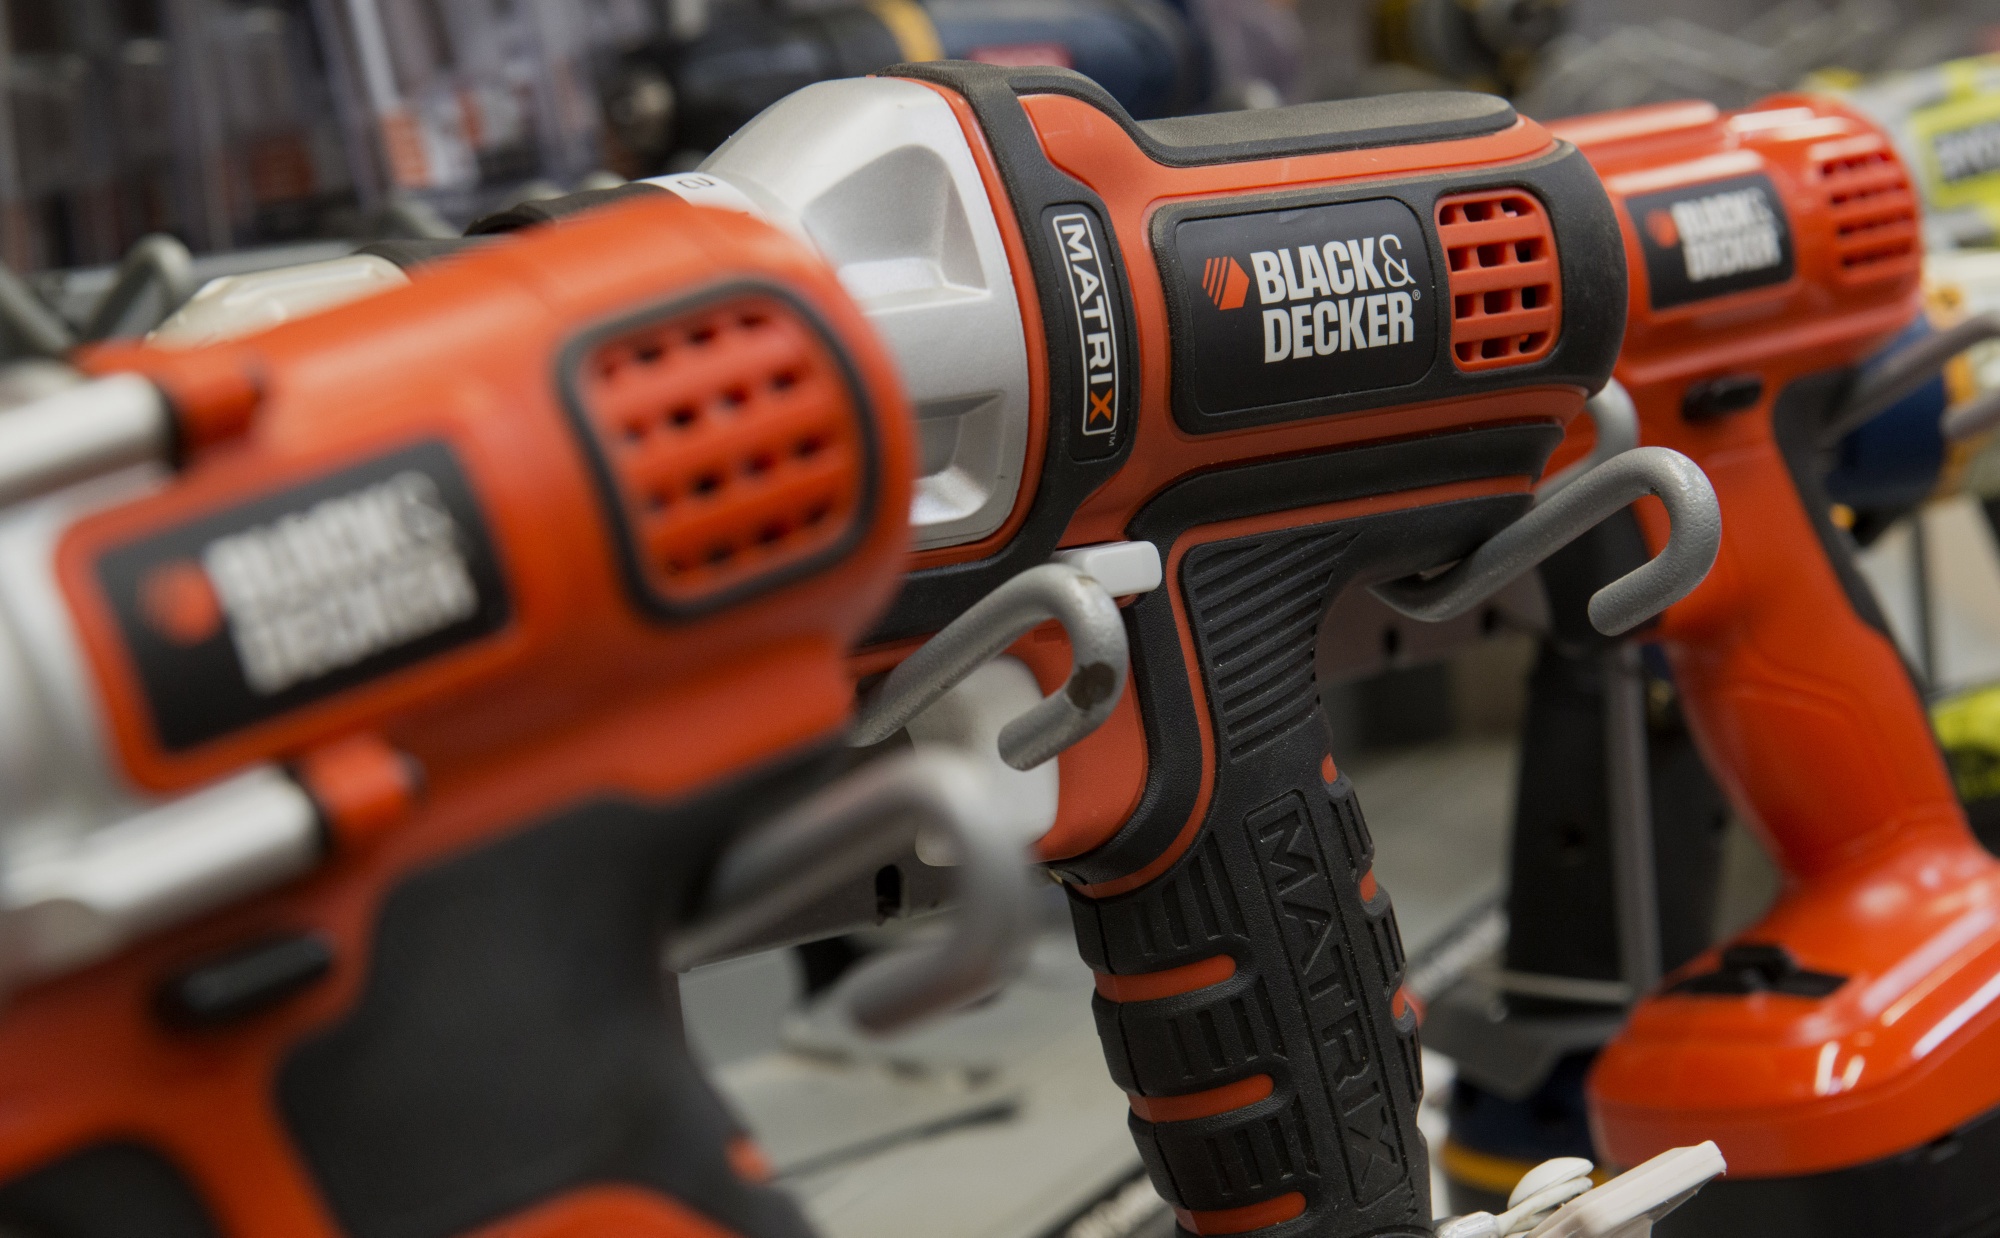 Stanley Black & Decker CEO Loree to step down; Allan tagged as next chief  executive